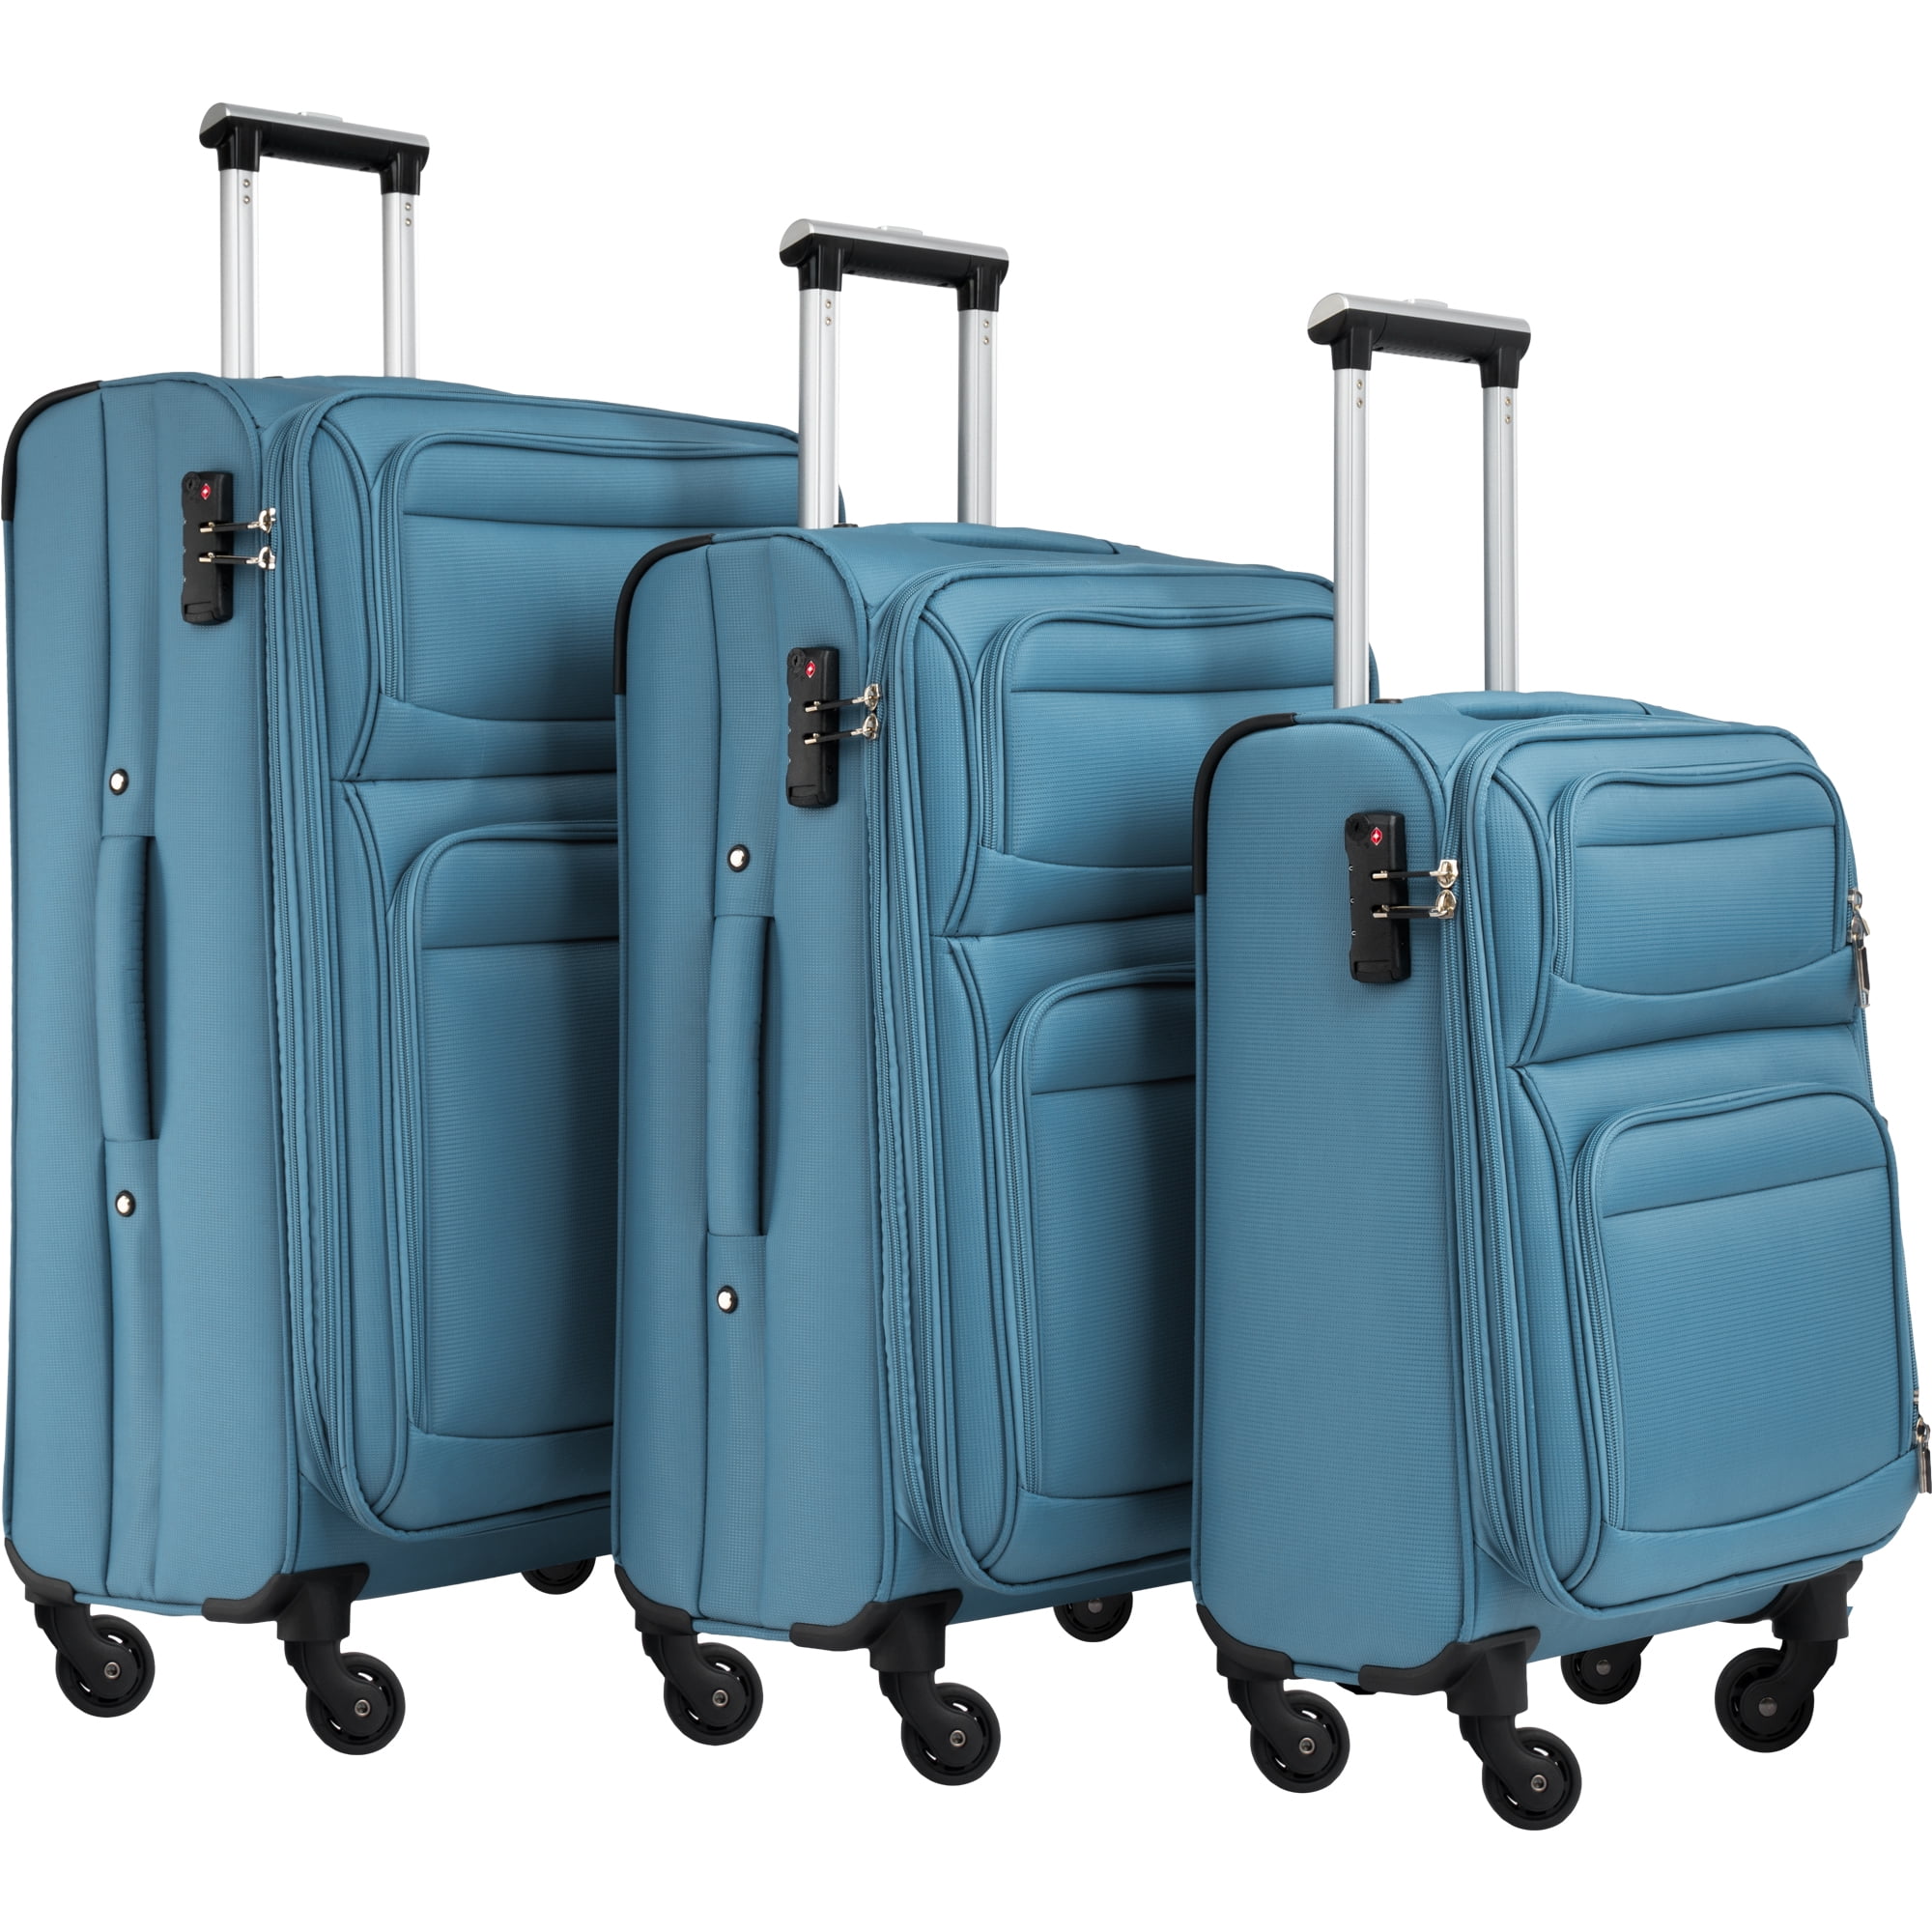 PAPROOS 3 Piece Softside Luggage Set, 22in 26in 30in 3 in 1 Oxford ...